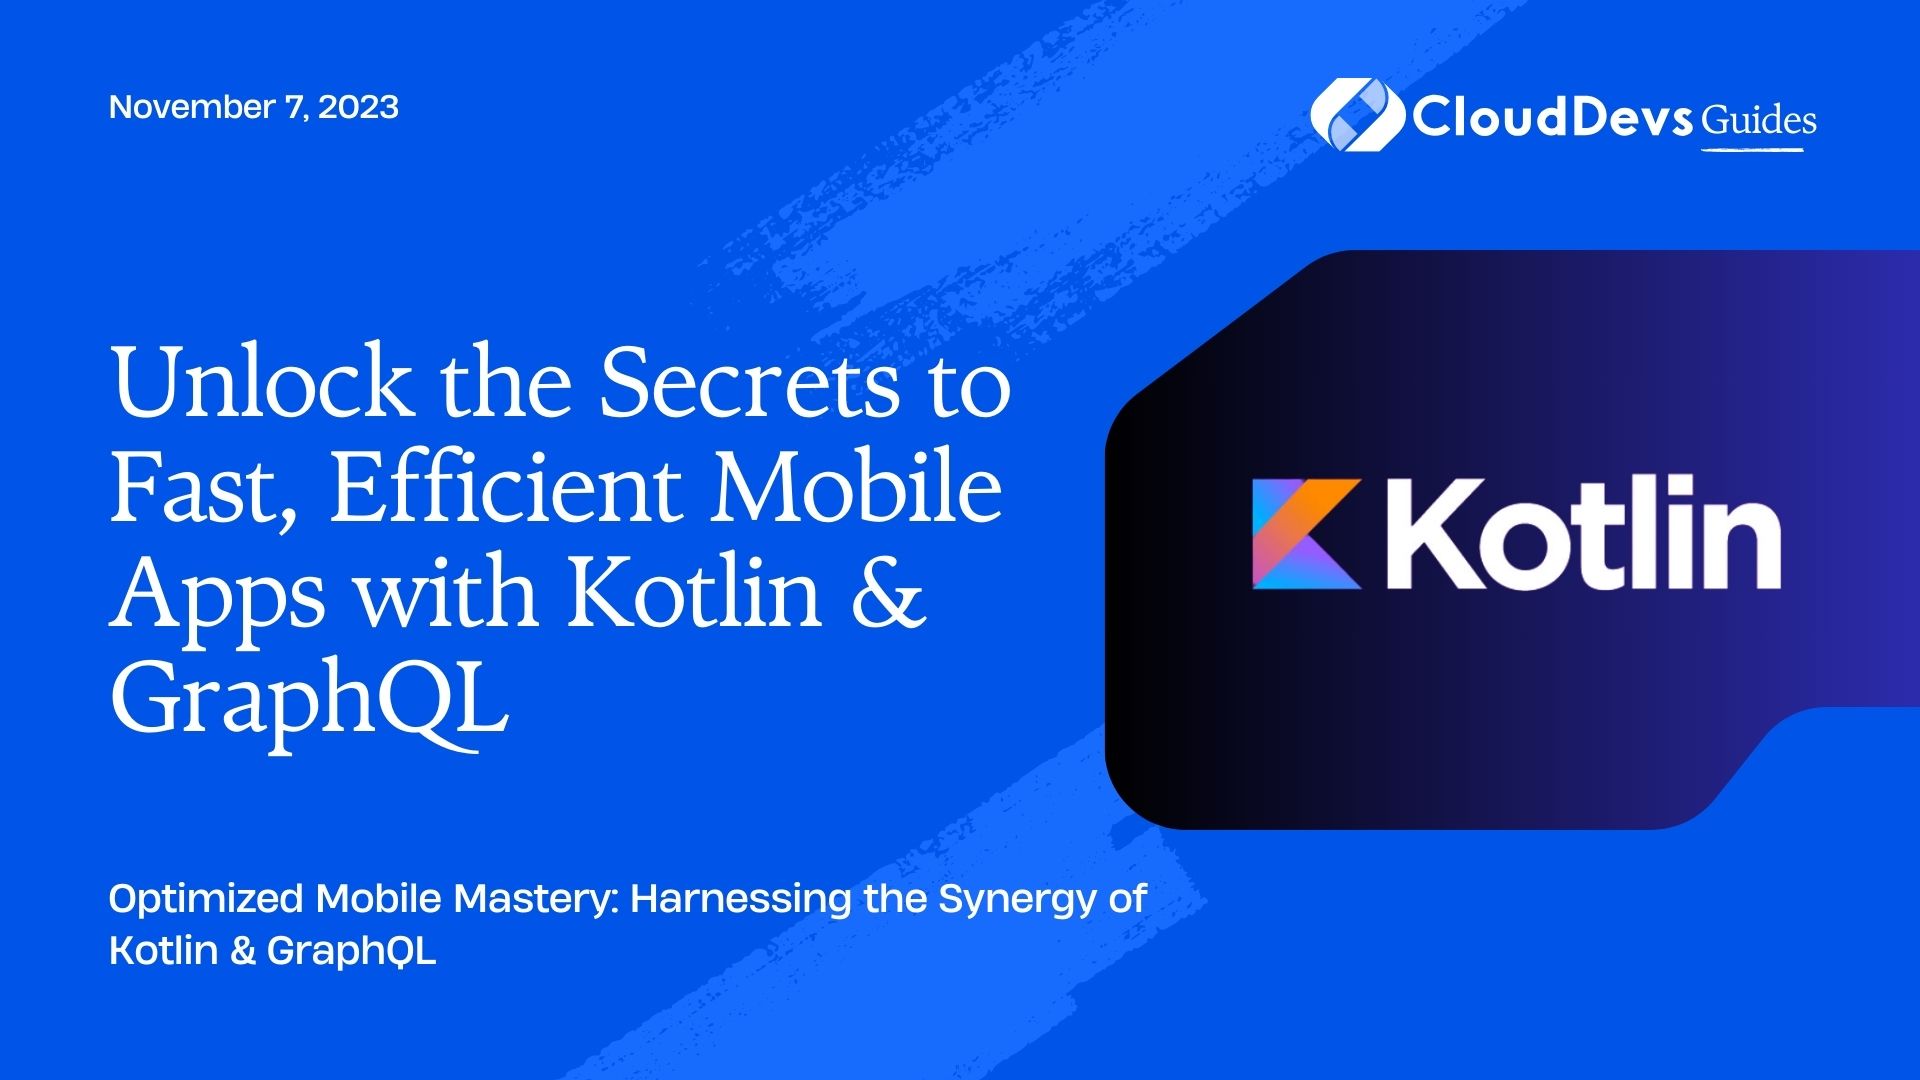 Unlock the Secrets to Fast, Efficient Mobile Apps with Kotlin & GraphQL